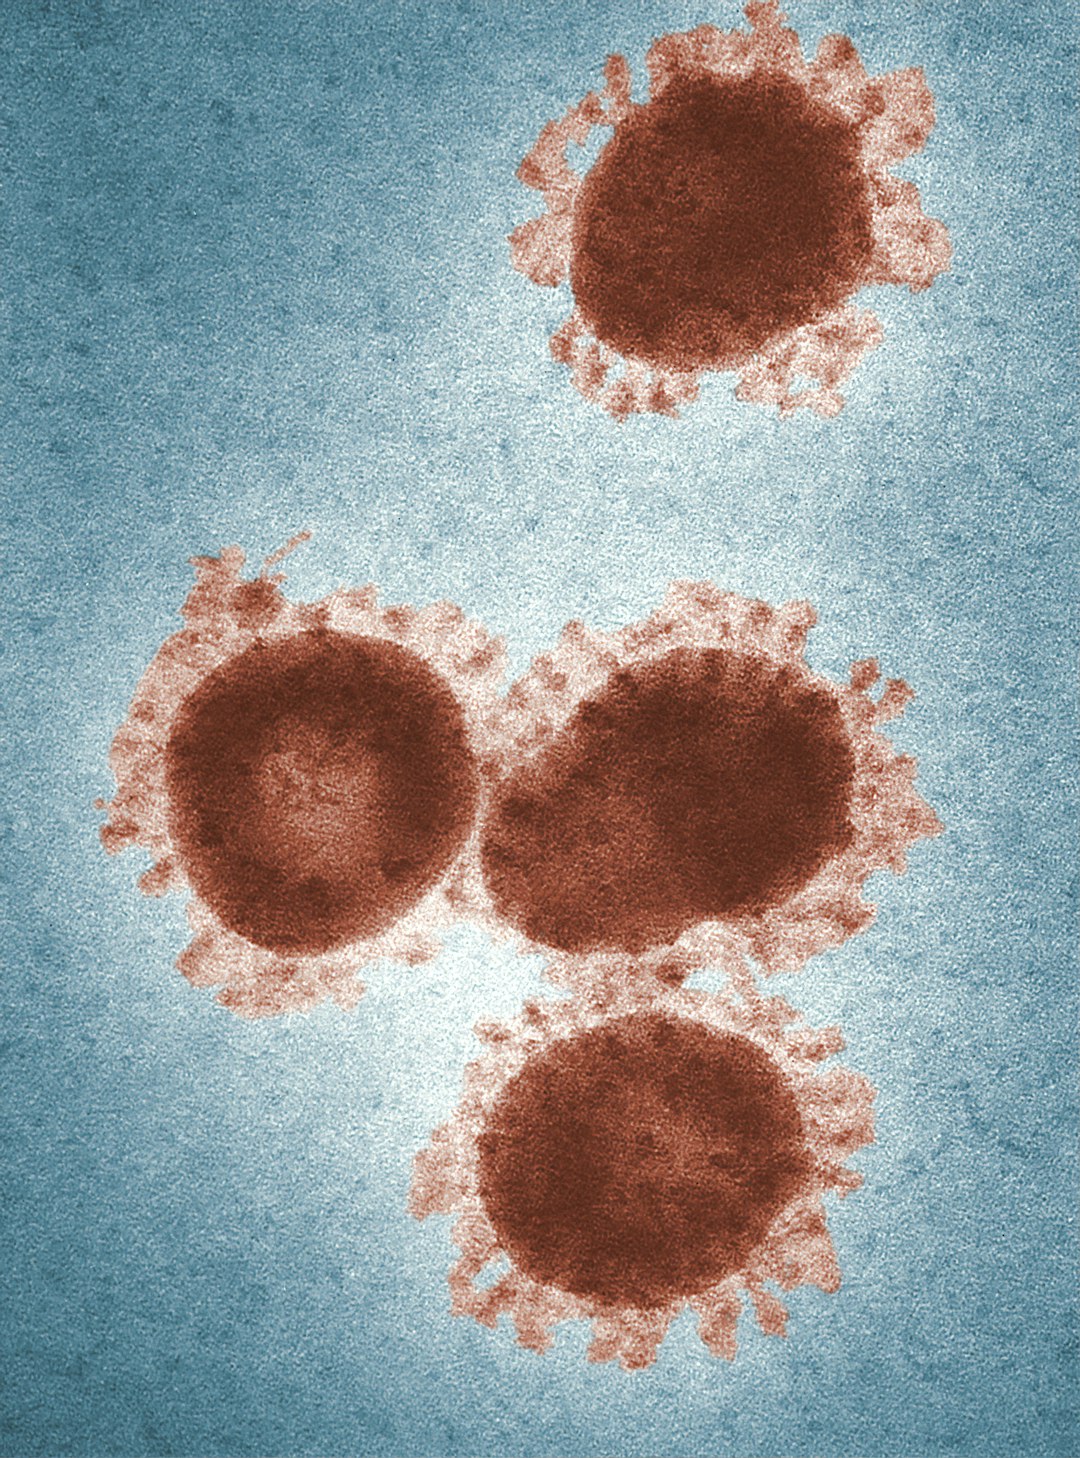 This 1975, digitally colorized transmission electron microscopic (TEM) image, depicted four avian infectious bronchitis virus (IBV) virions, which are Coronaviridae family members. IBV is a highly contagious pathogen, which infects poultry of all ages, affecting a number of organ systems, including the respiratory and urogenital organs. IBV possesses a helical genome, composed of non-segmented, positive-sense single-stranded RNA ((+) ssRNA). This is an enveloped virus, which means that its outermost covering is derived from the host cell membrane. The coronavirus derives its name from the fact